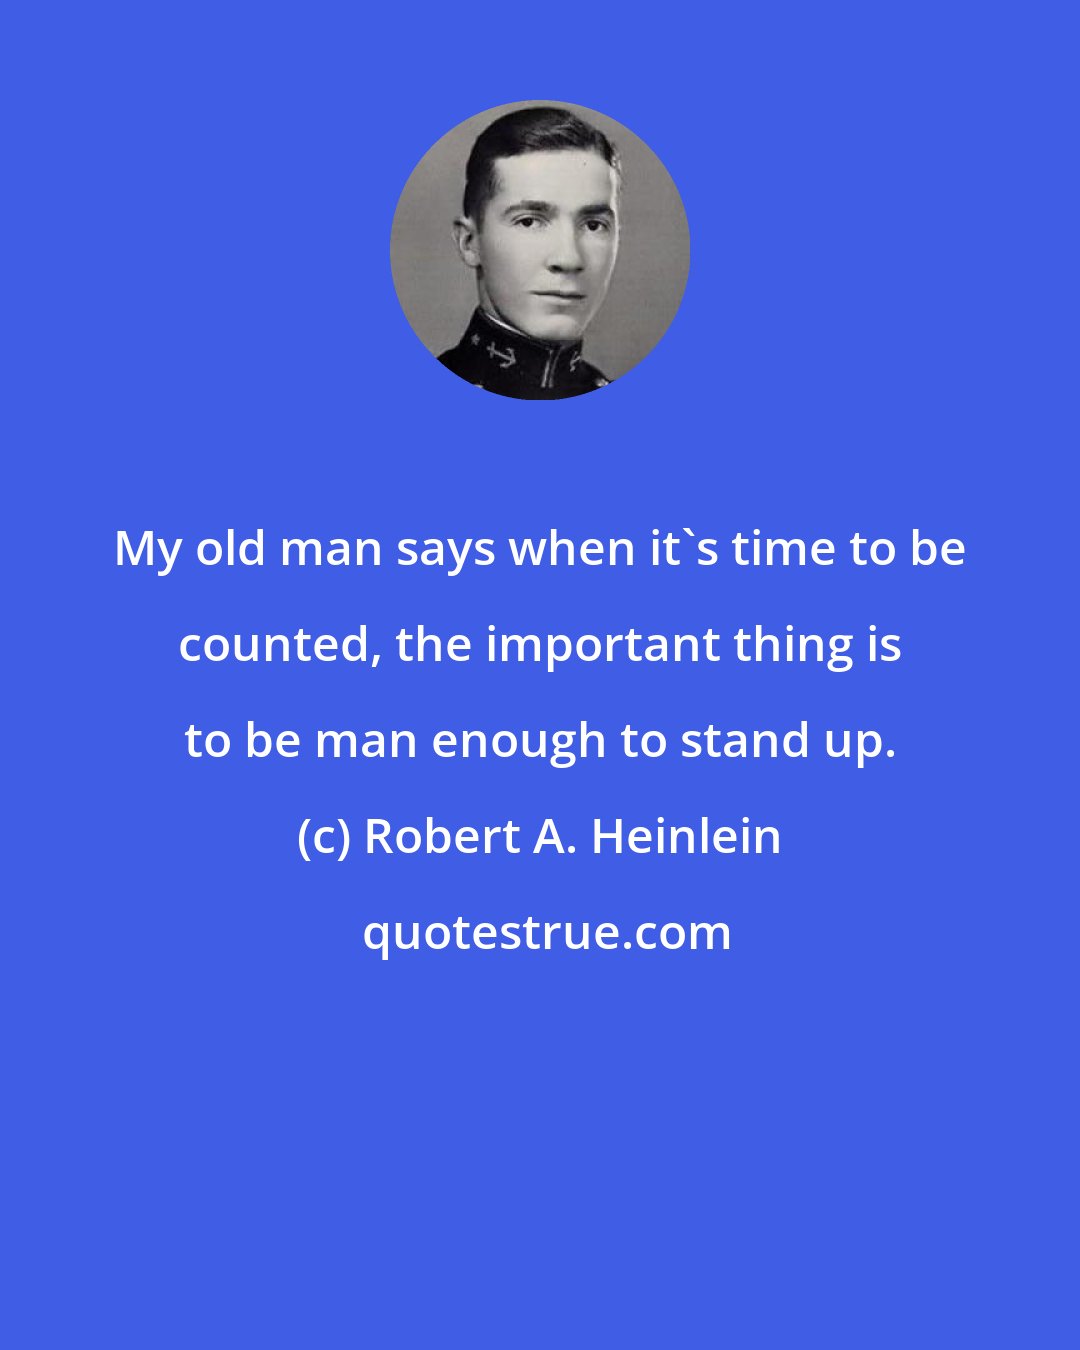 Robert A. Heinlein: My old man says when it's time to be counted, the important thing is to be man enough to stand up.